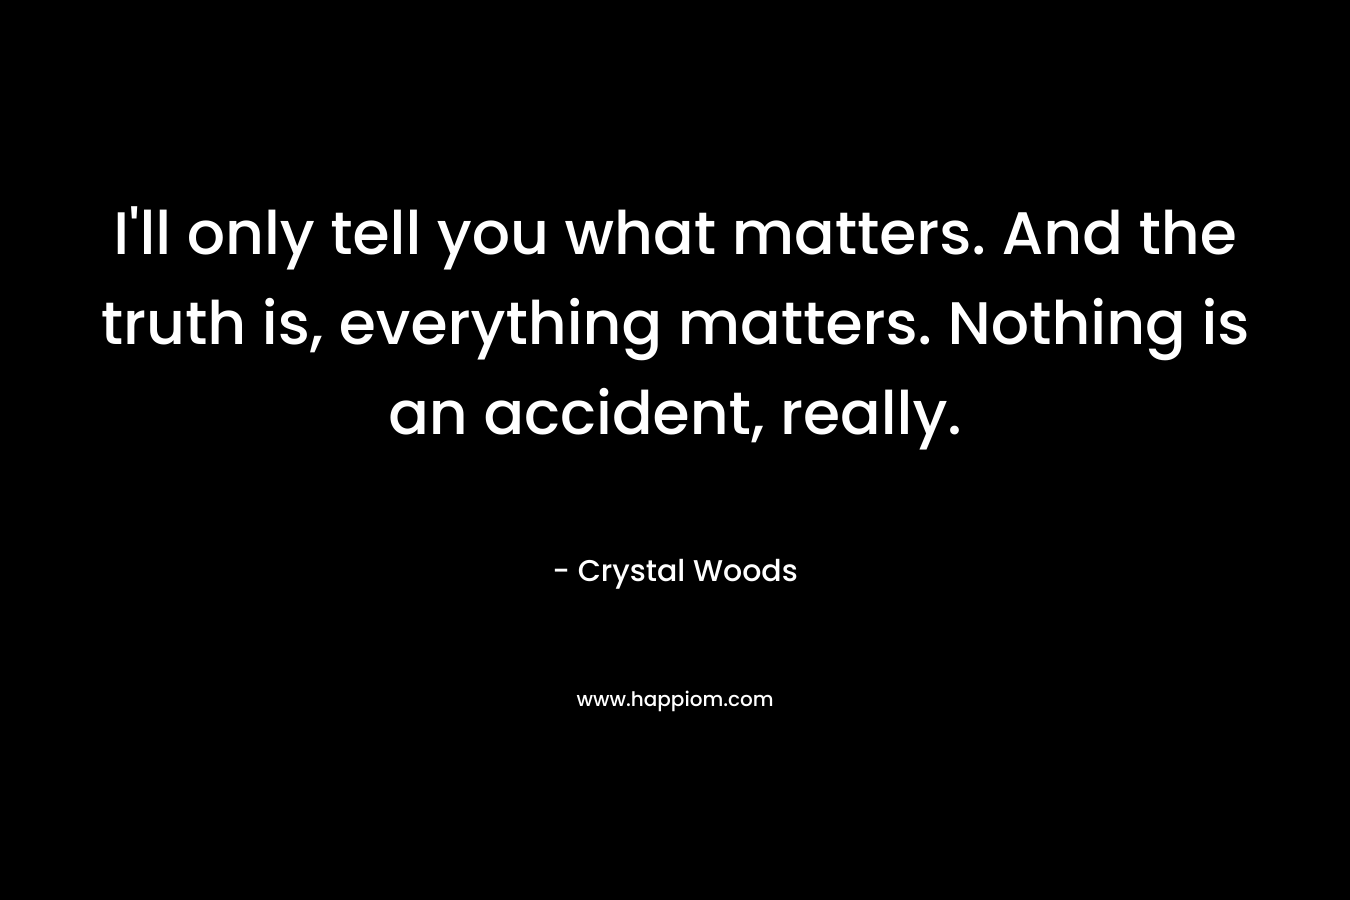 I'll only tell you what matters. And the truth is, everything matters. Nothing is an accident, really.